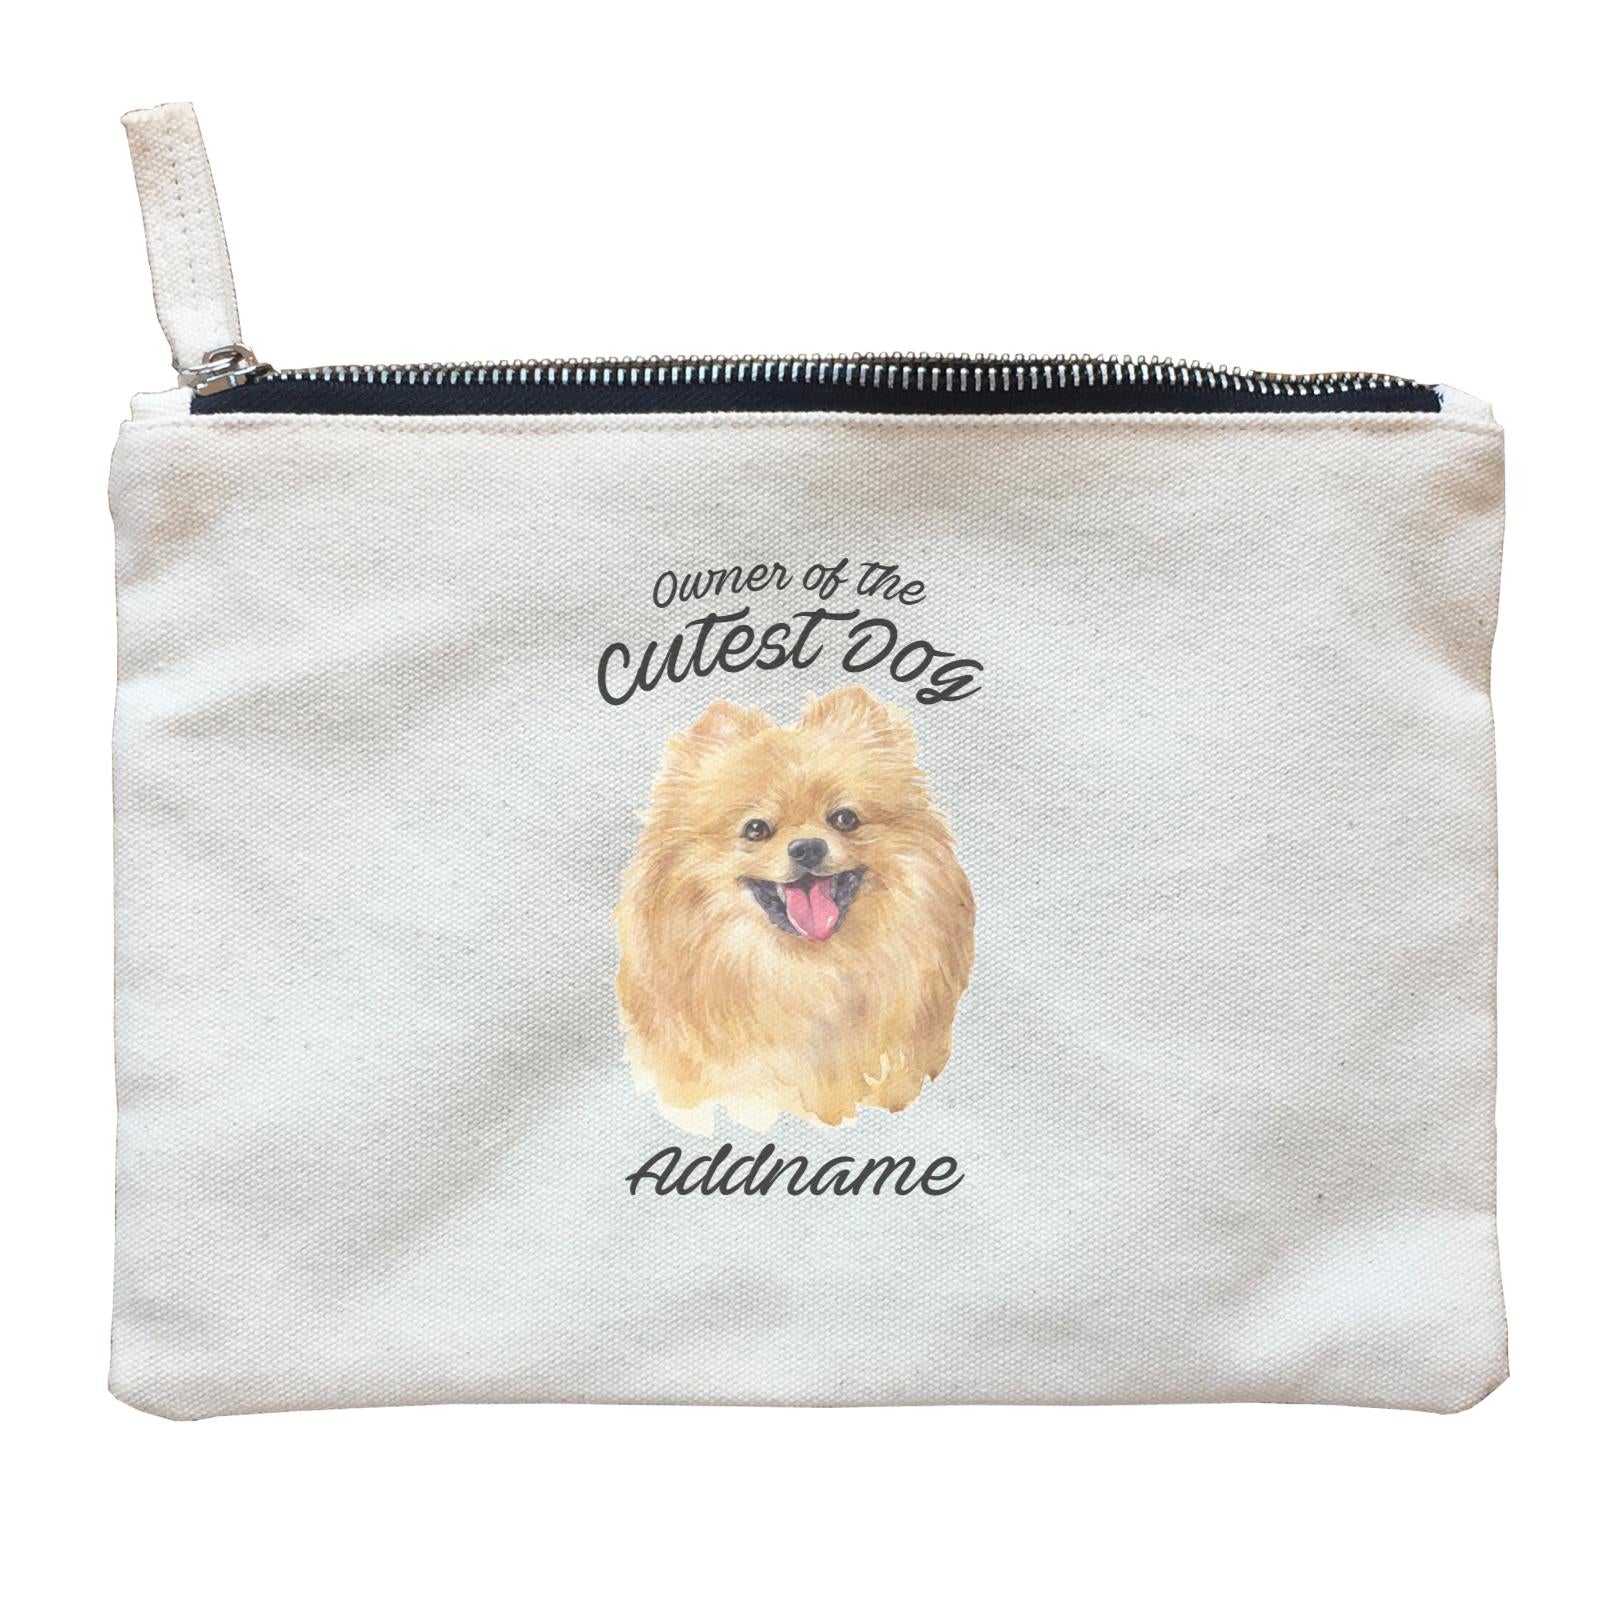 Watercolor Dog Owner Of The Cutest Dog Pomeranian Addname Zipper Pouch